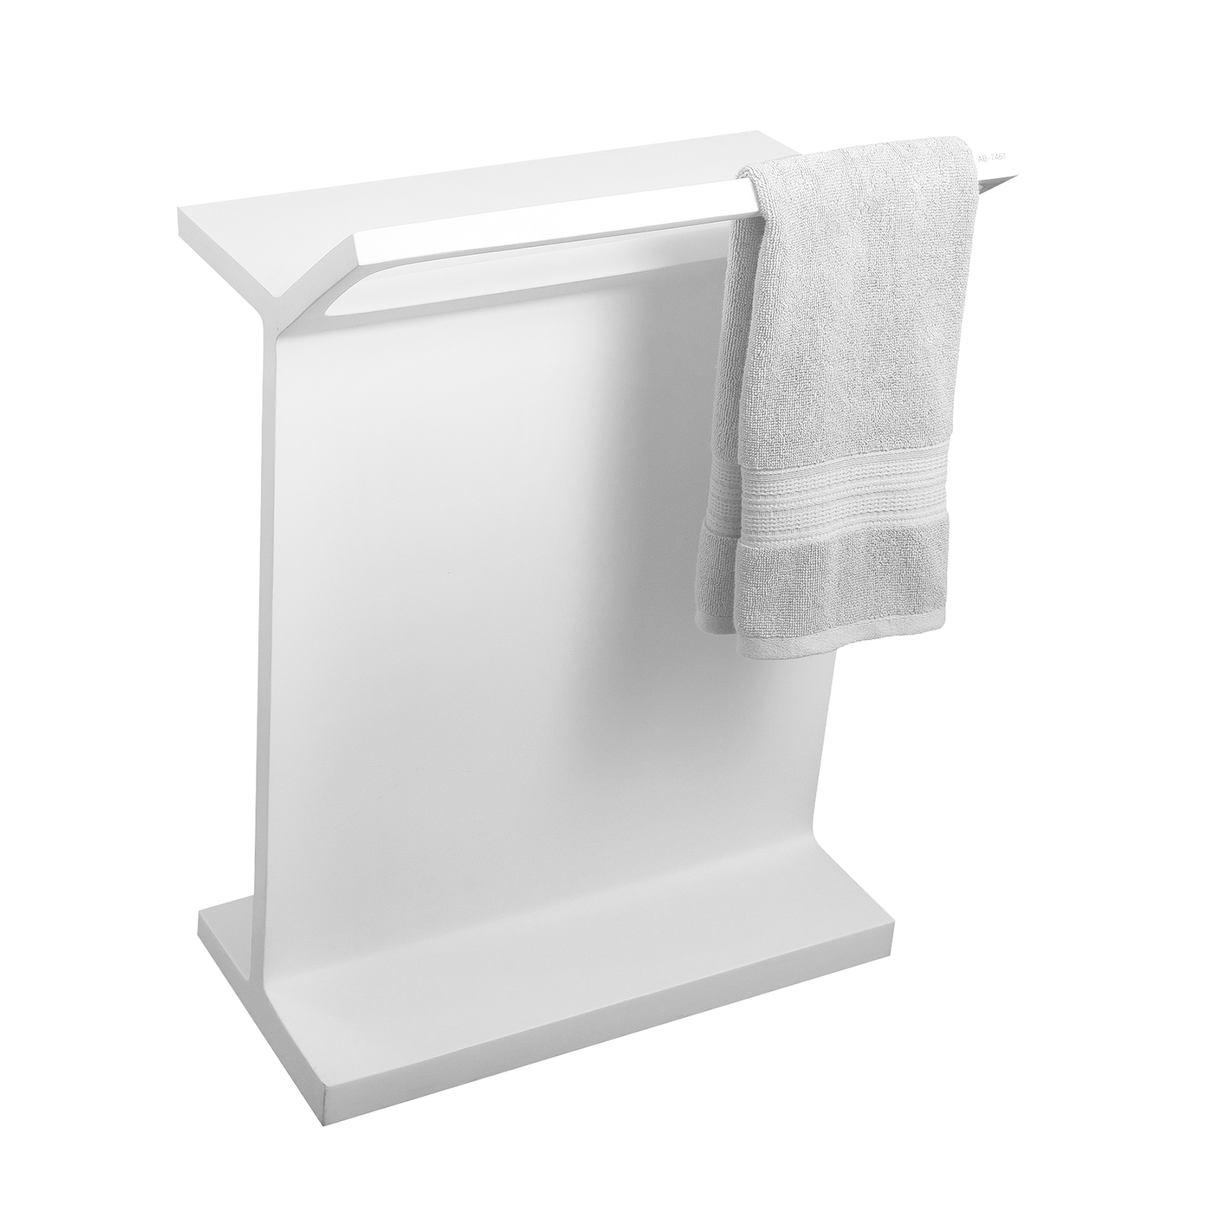 DAX Solid Surface Towel Hanger, 27", White DAX-AB-7461